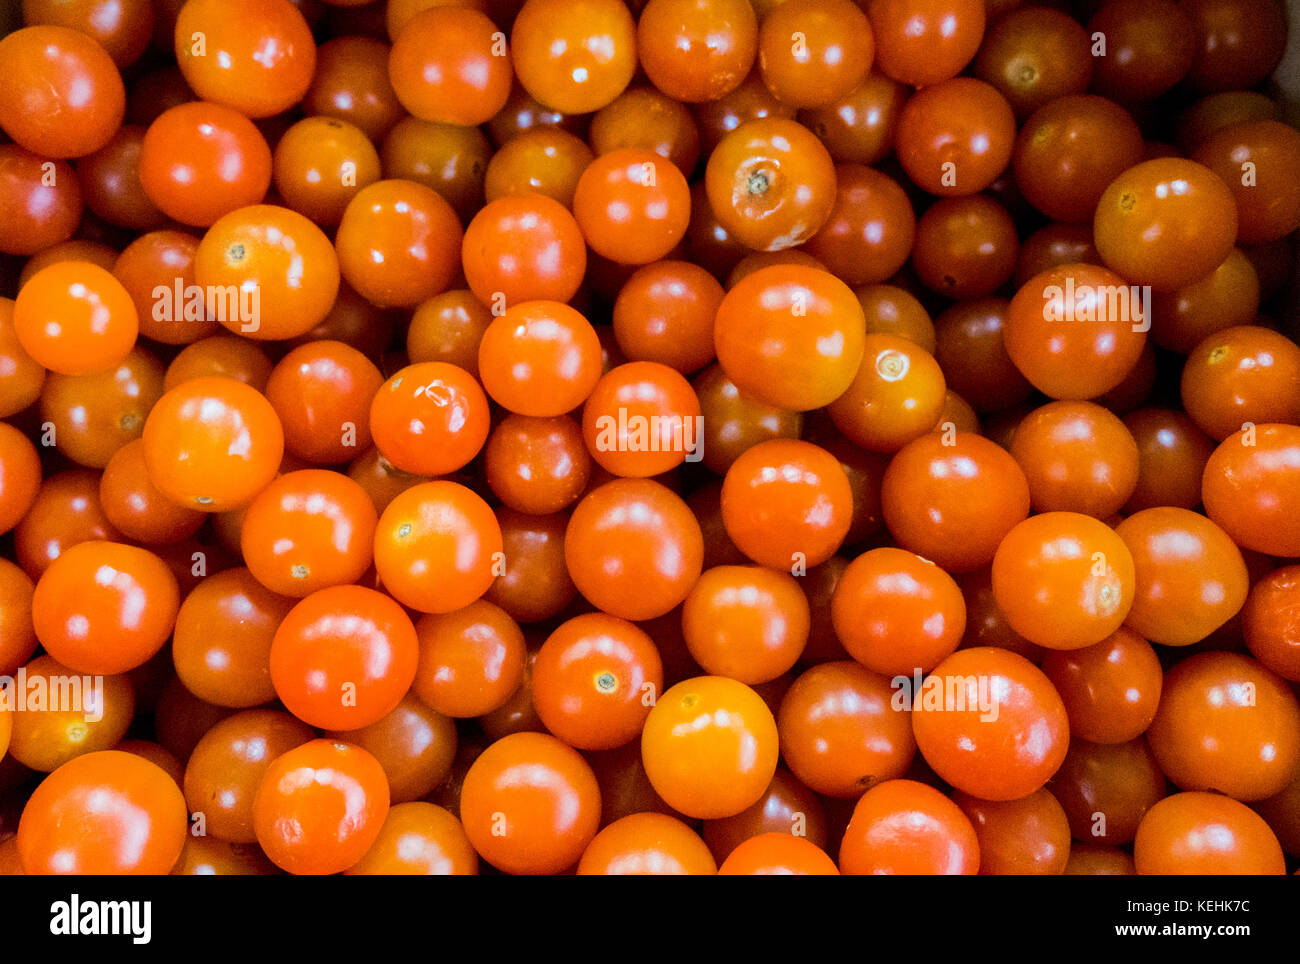 Pile of tomatoes Stock Photo